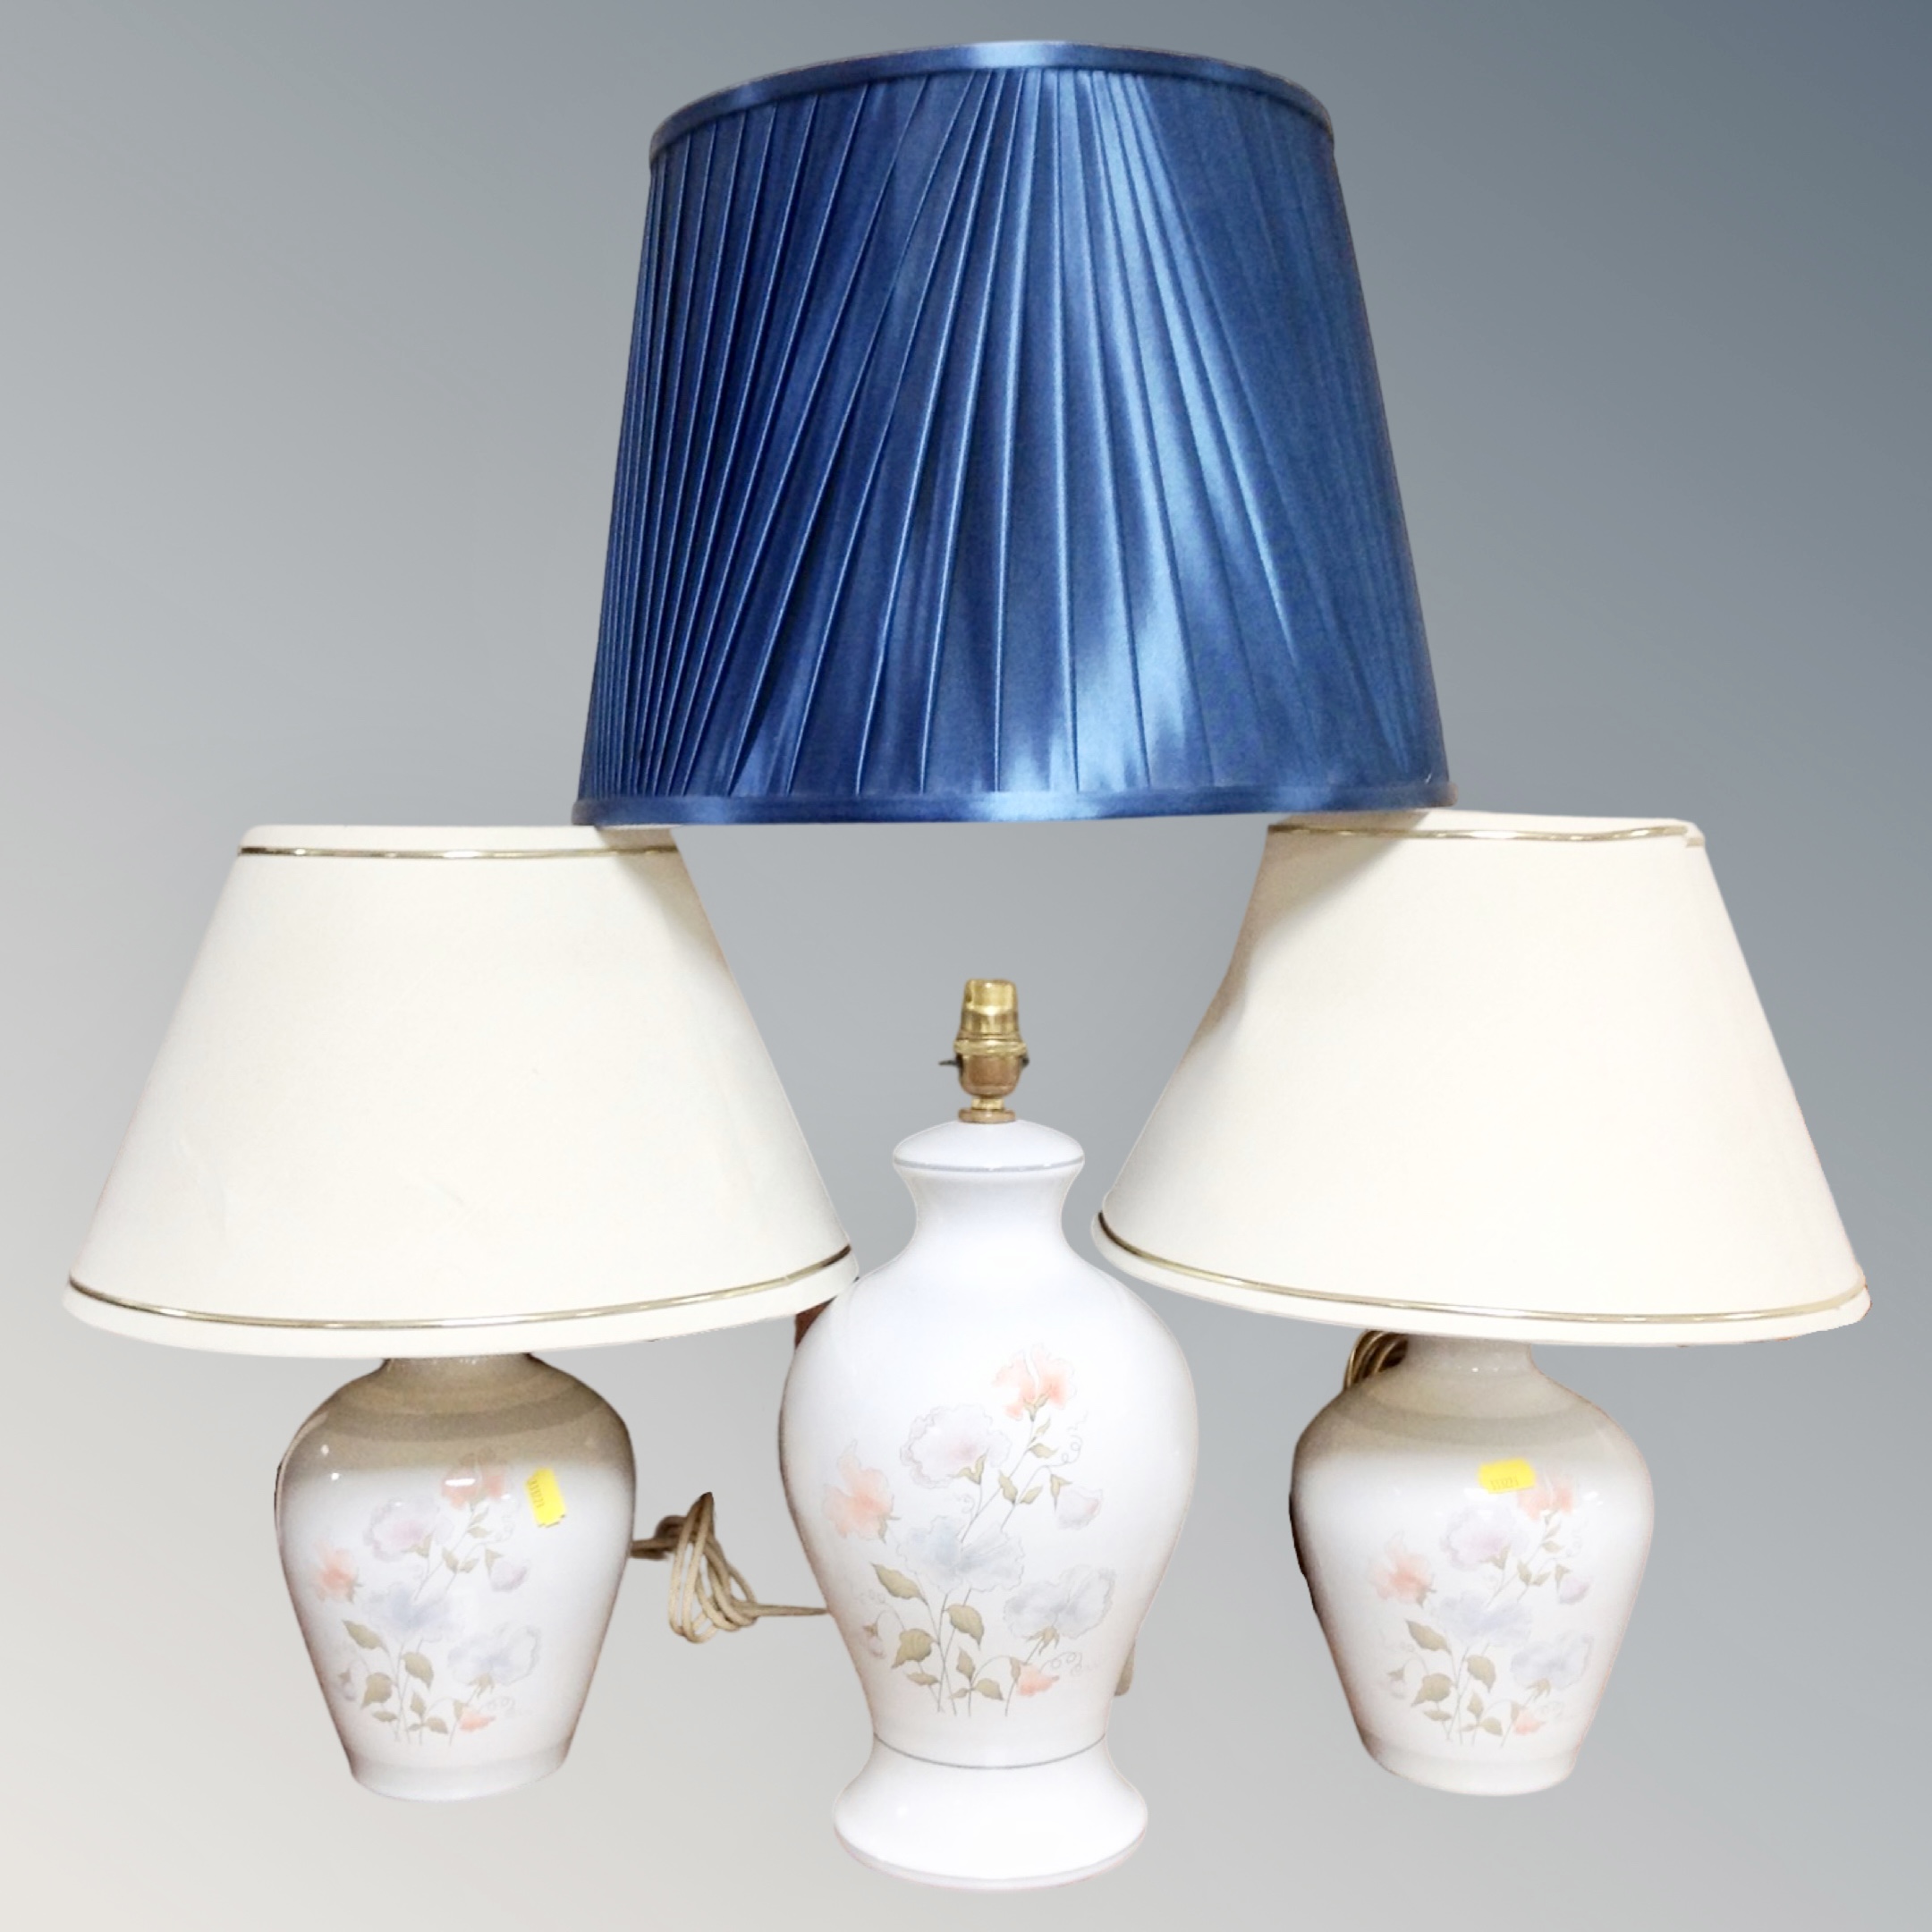 Three Denby table lamps with shades